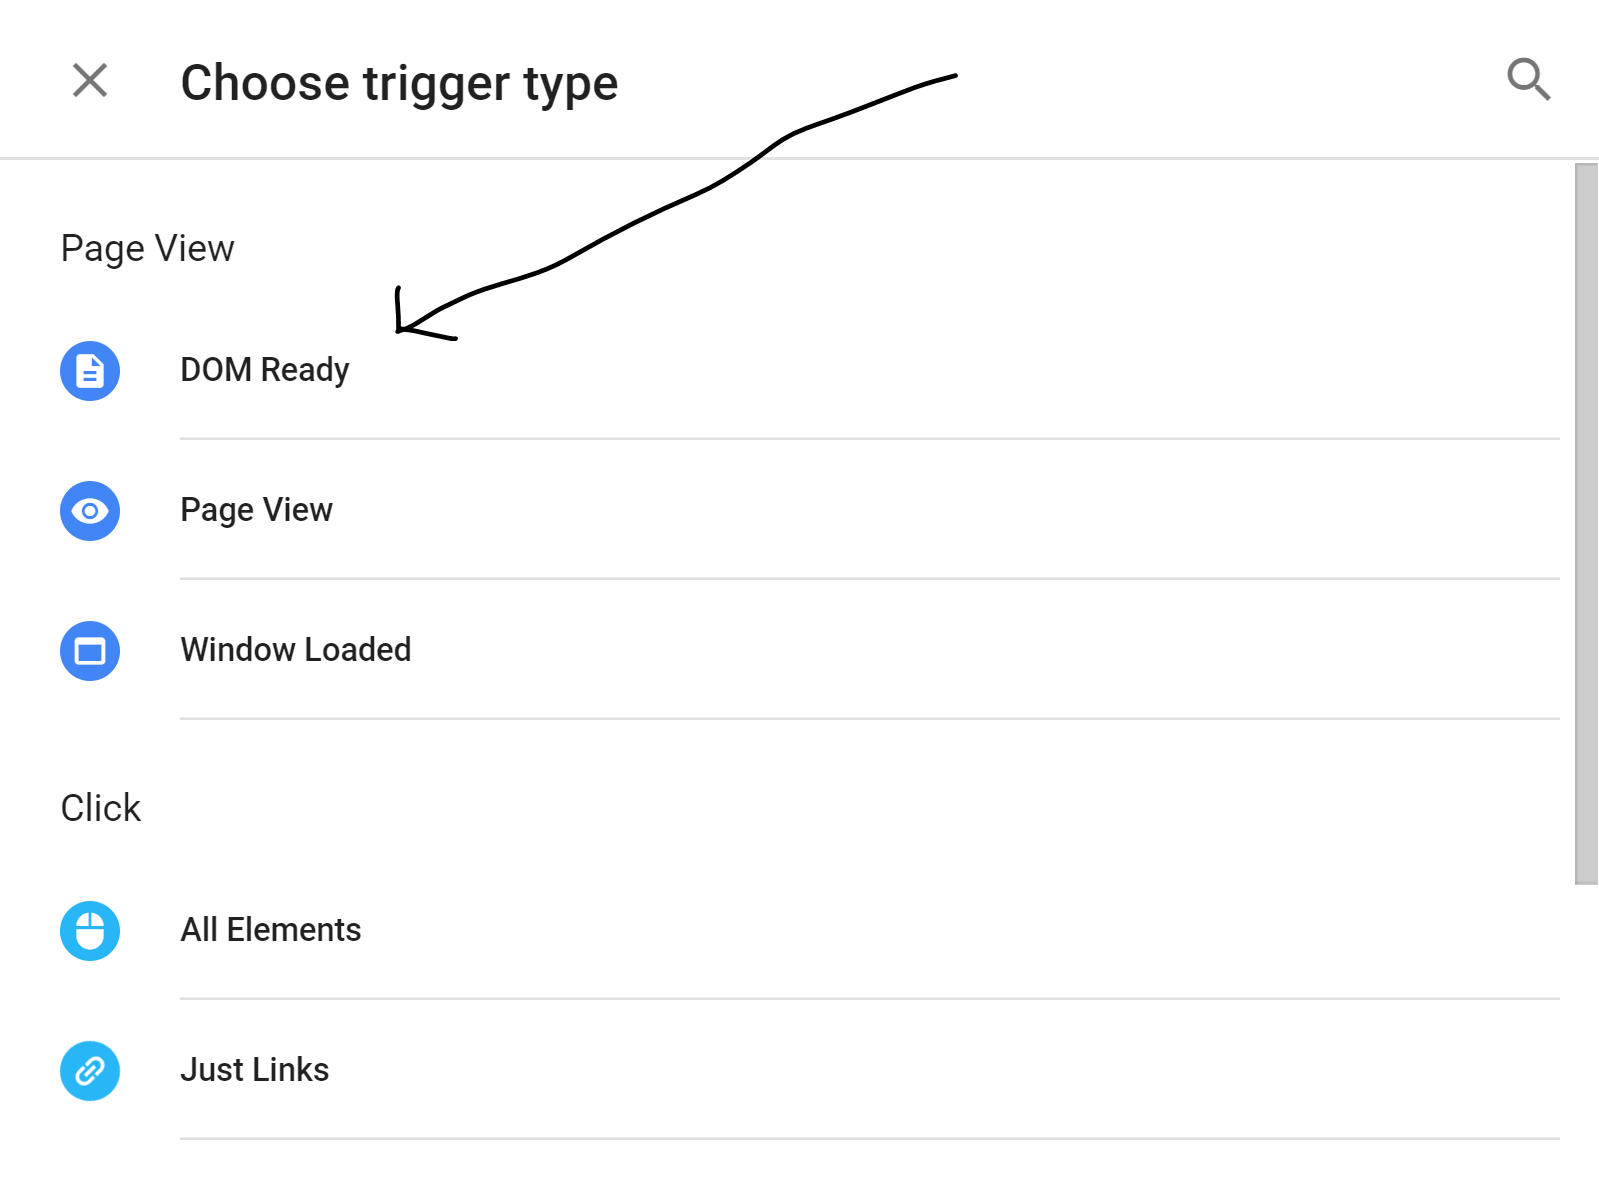 Select the "DOM Ready" trigger type.